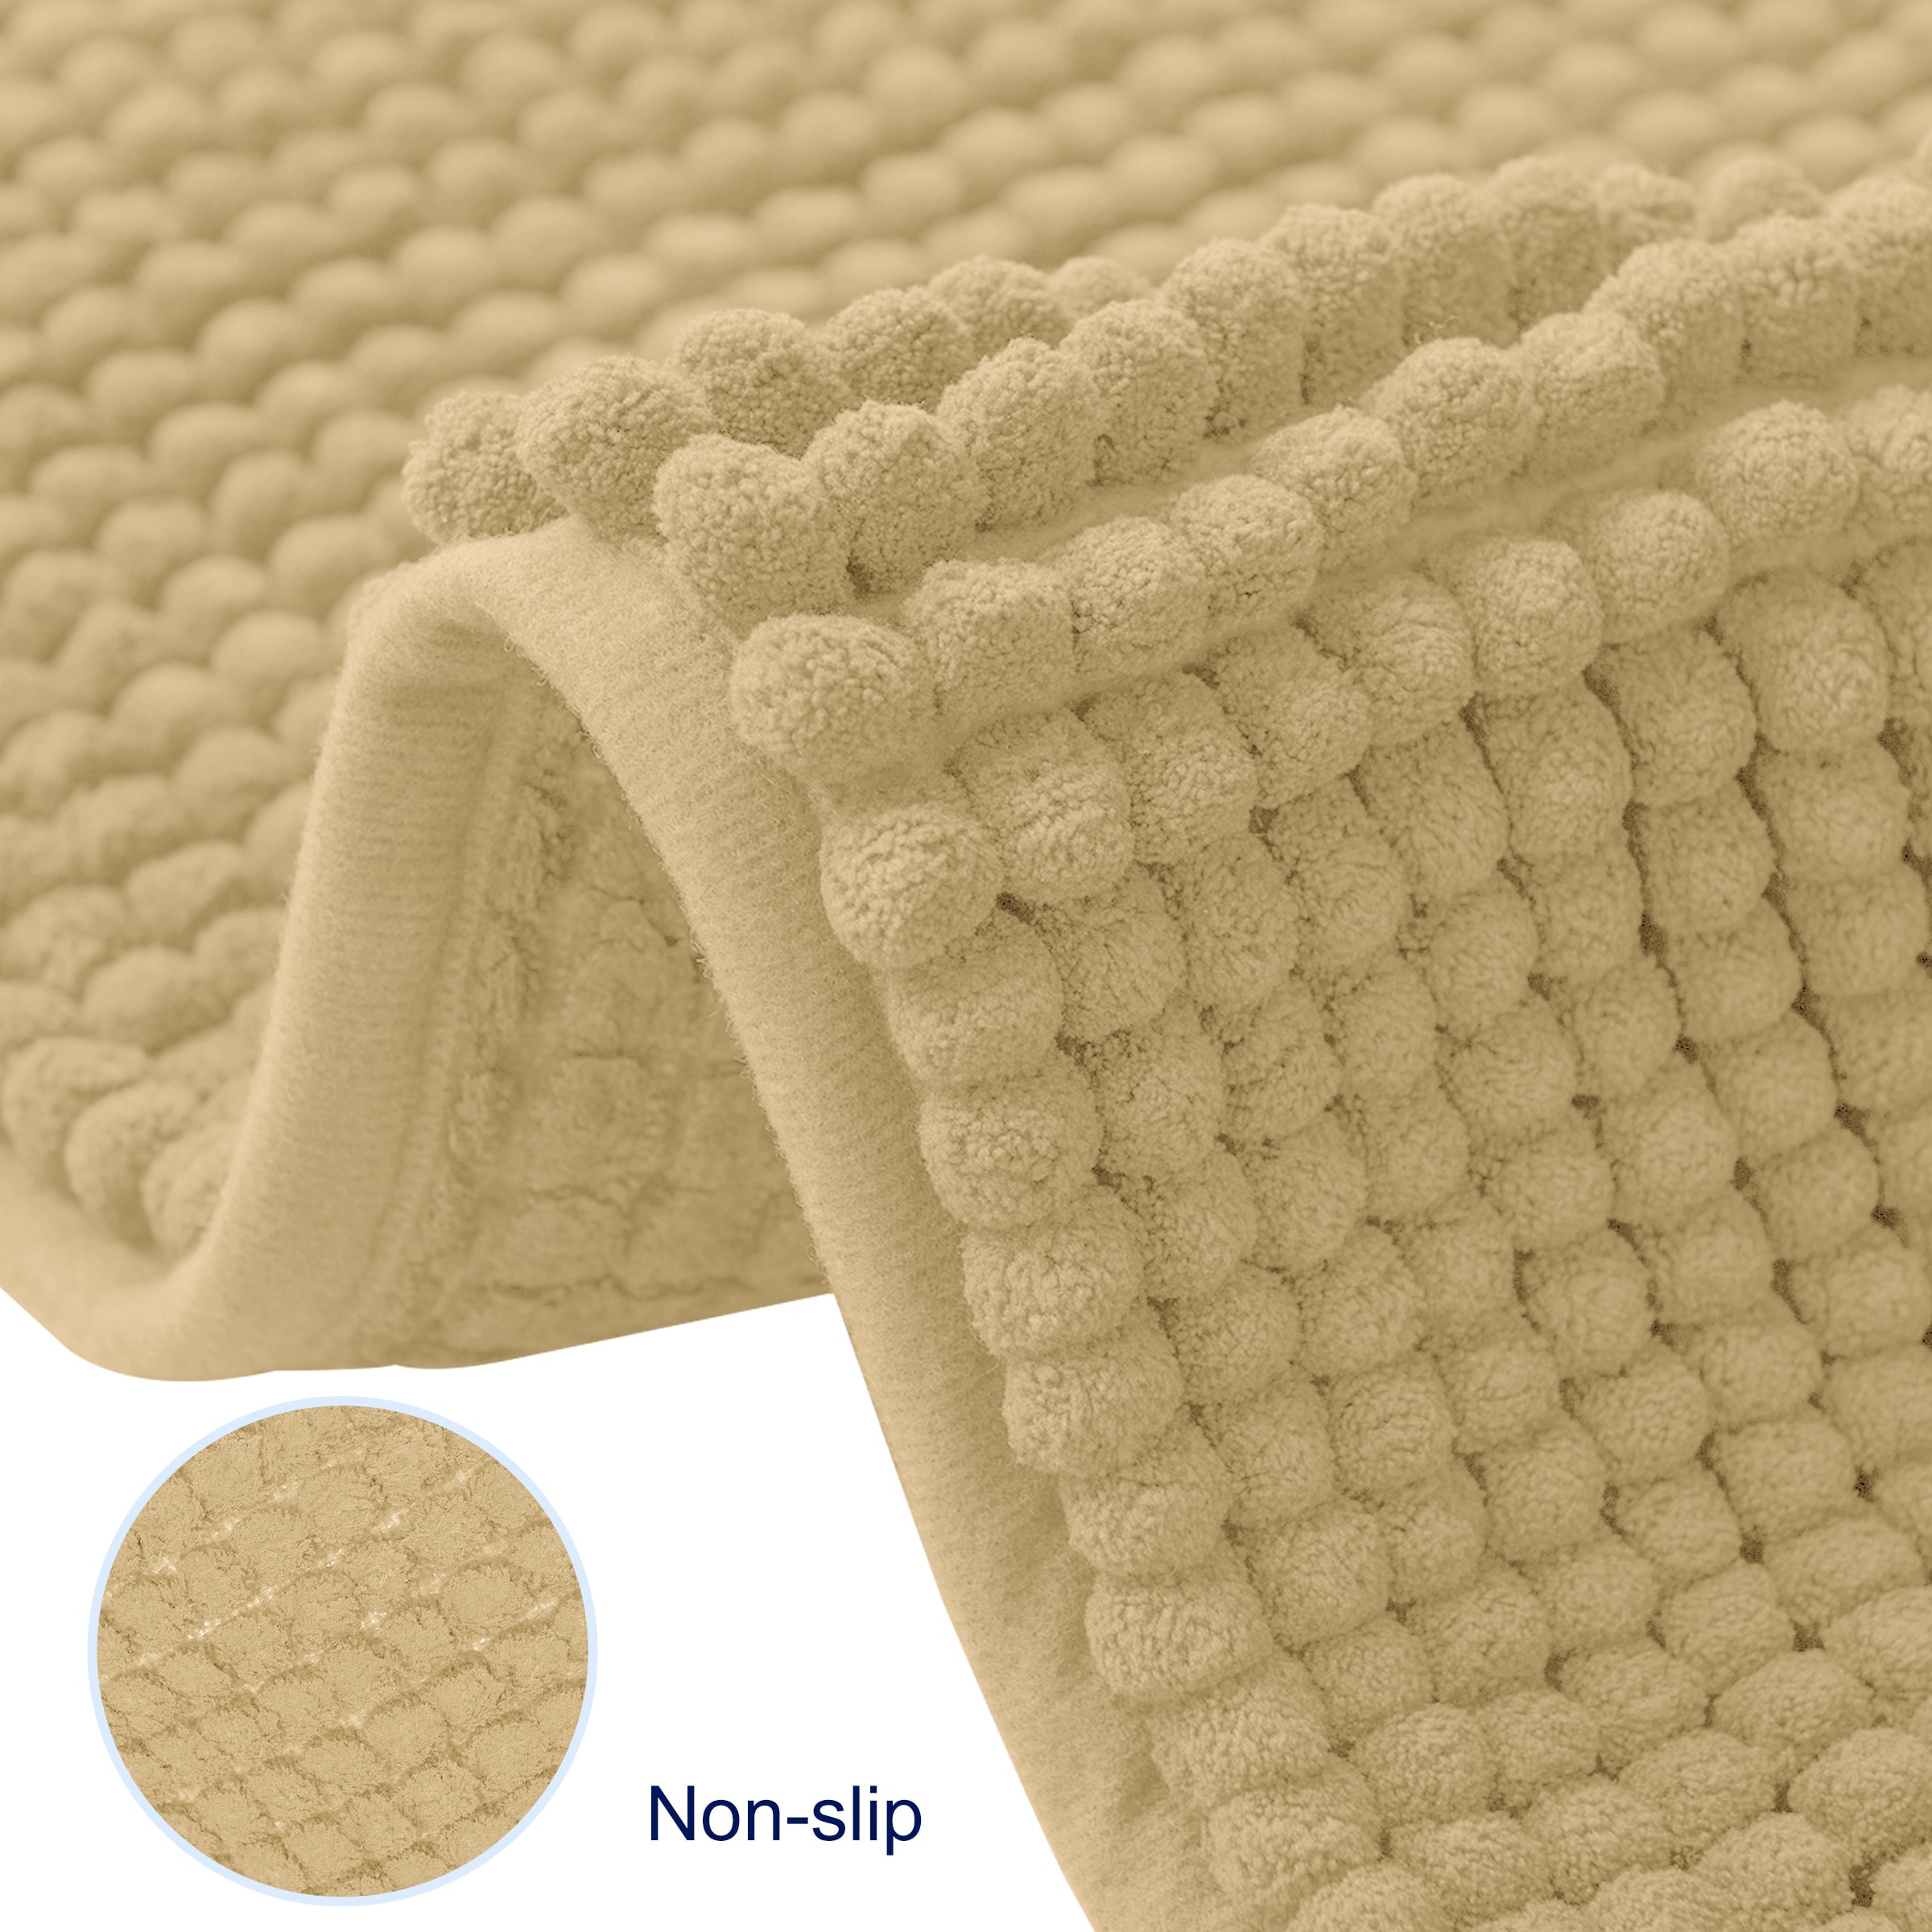 Yeaban Taupe Bathroom Rugs Sets 2 Piece – Thick Chenille Bath Mats |  Absorbent and Washable Bath Rug Non-Slip, Plush and Soft Rugs for Bathroom  Floor